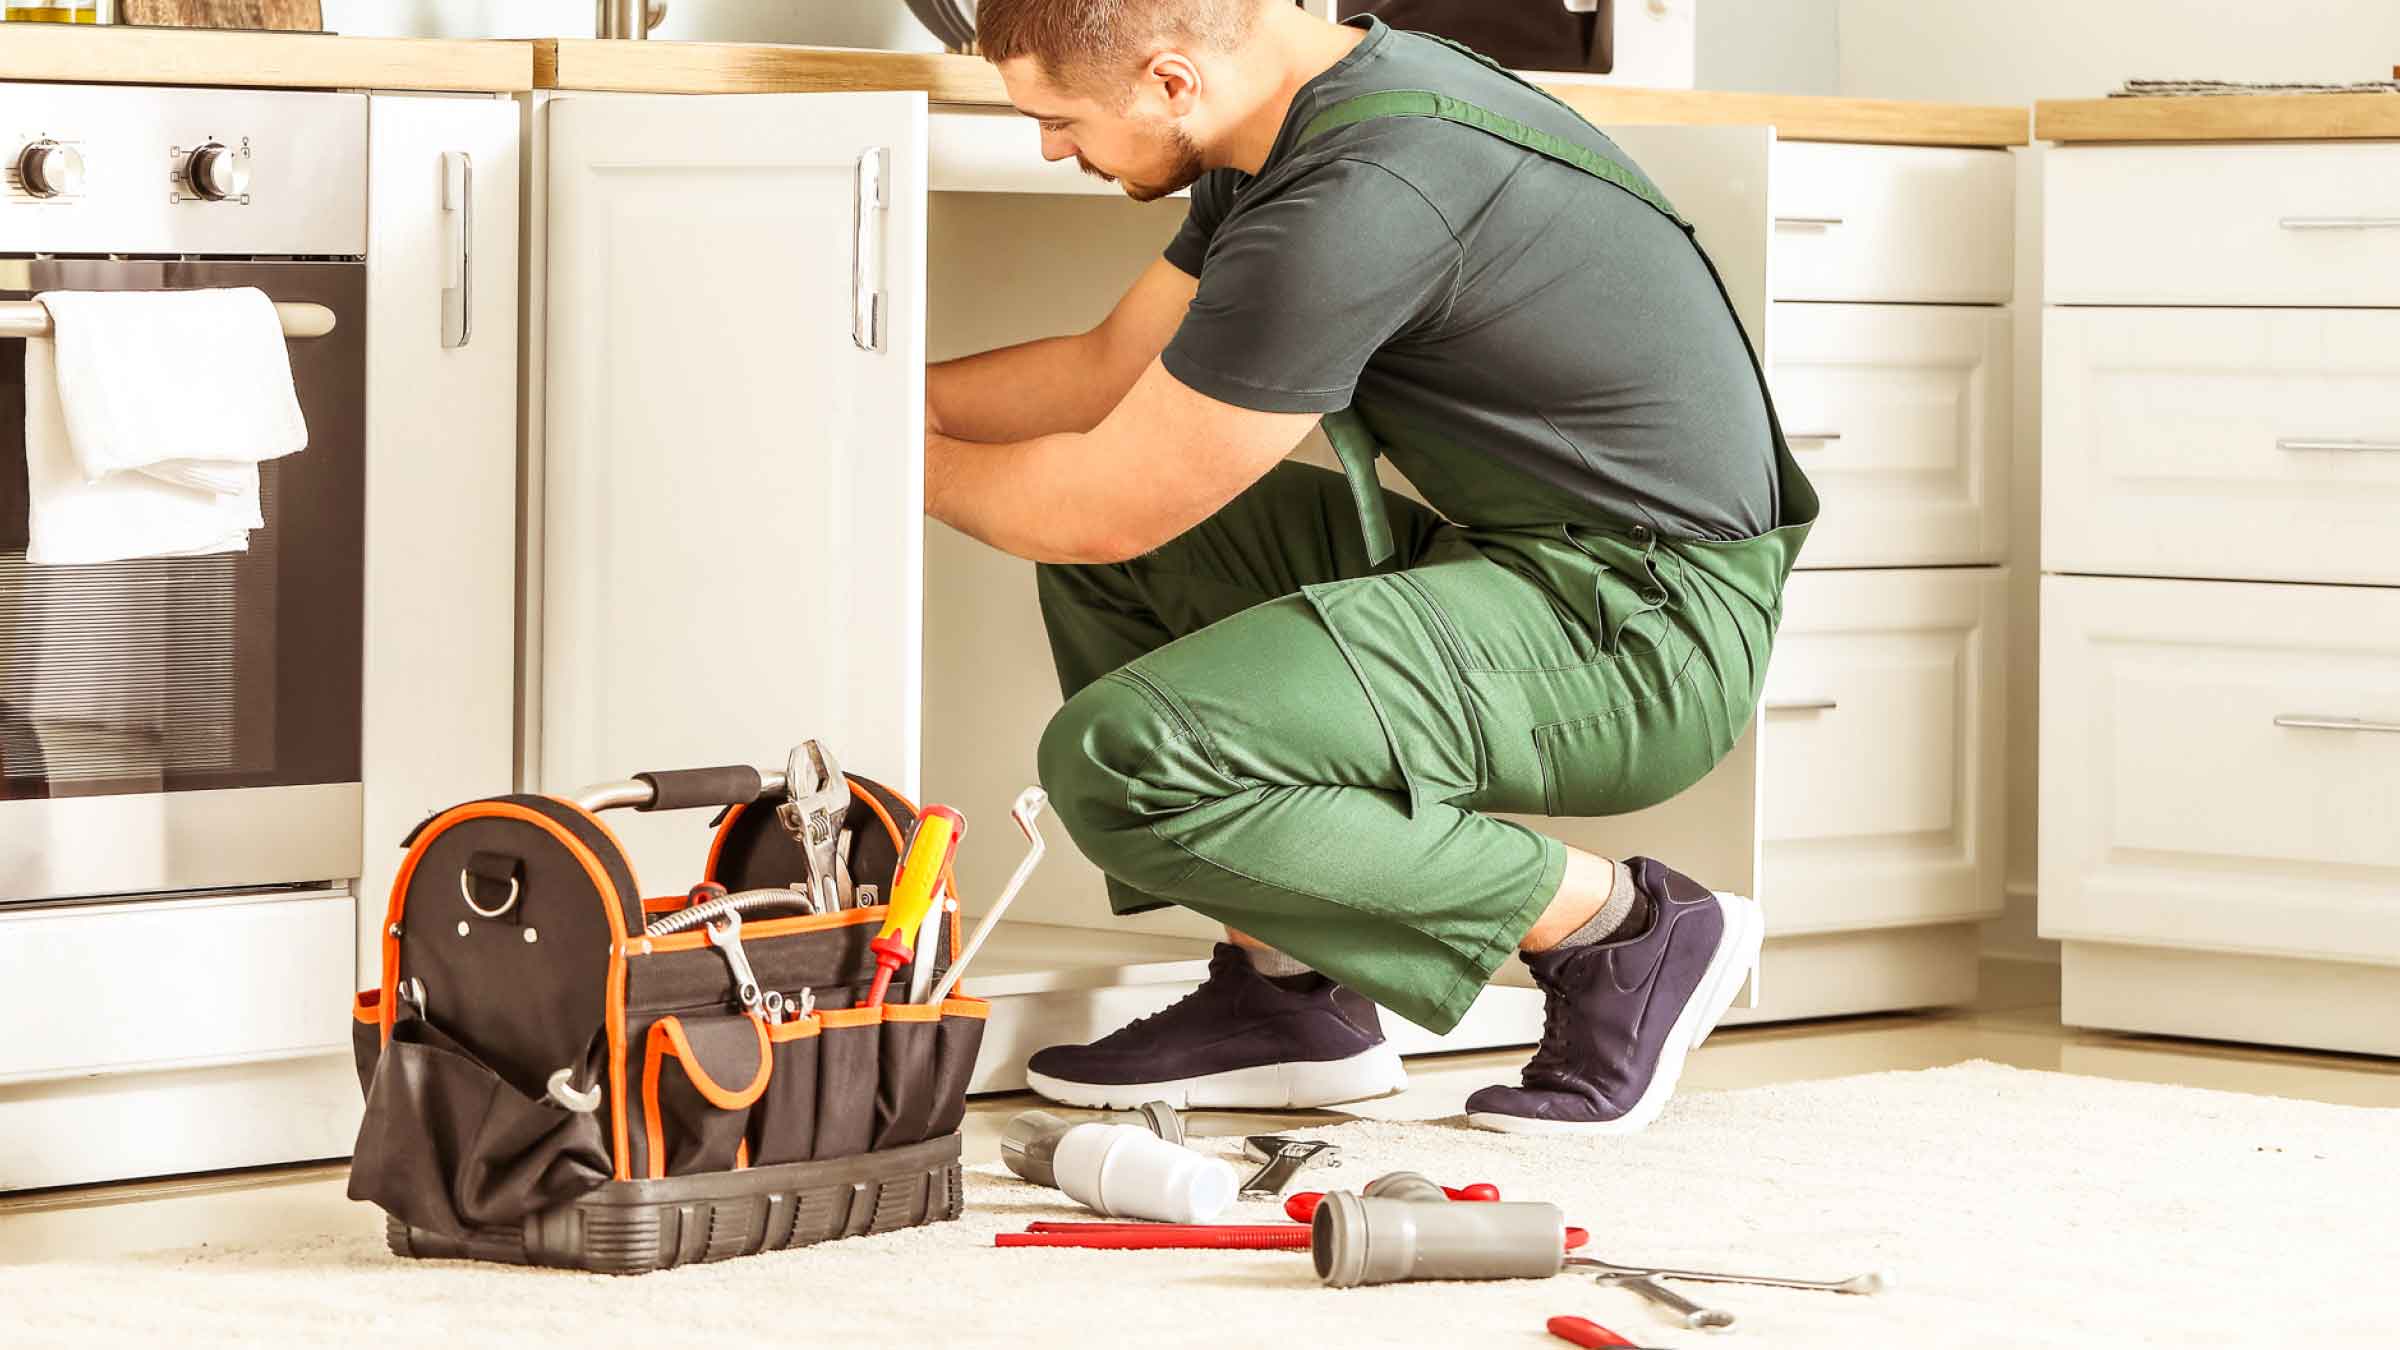 Plumber in green overalls crouches in front of kitchen sink cupboard, his tools and pipe parts are laid out beside him.